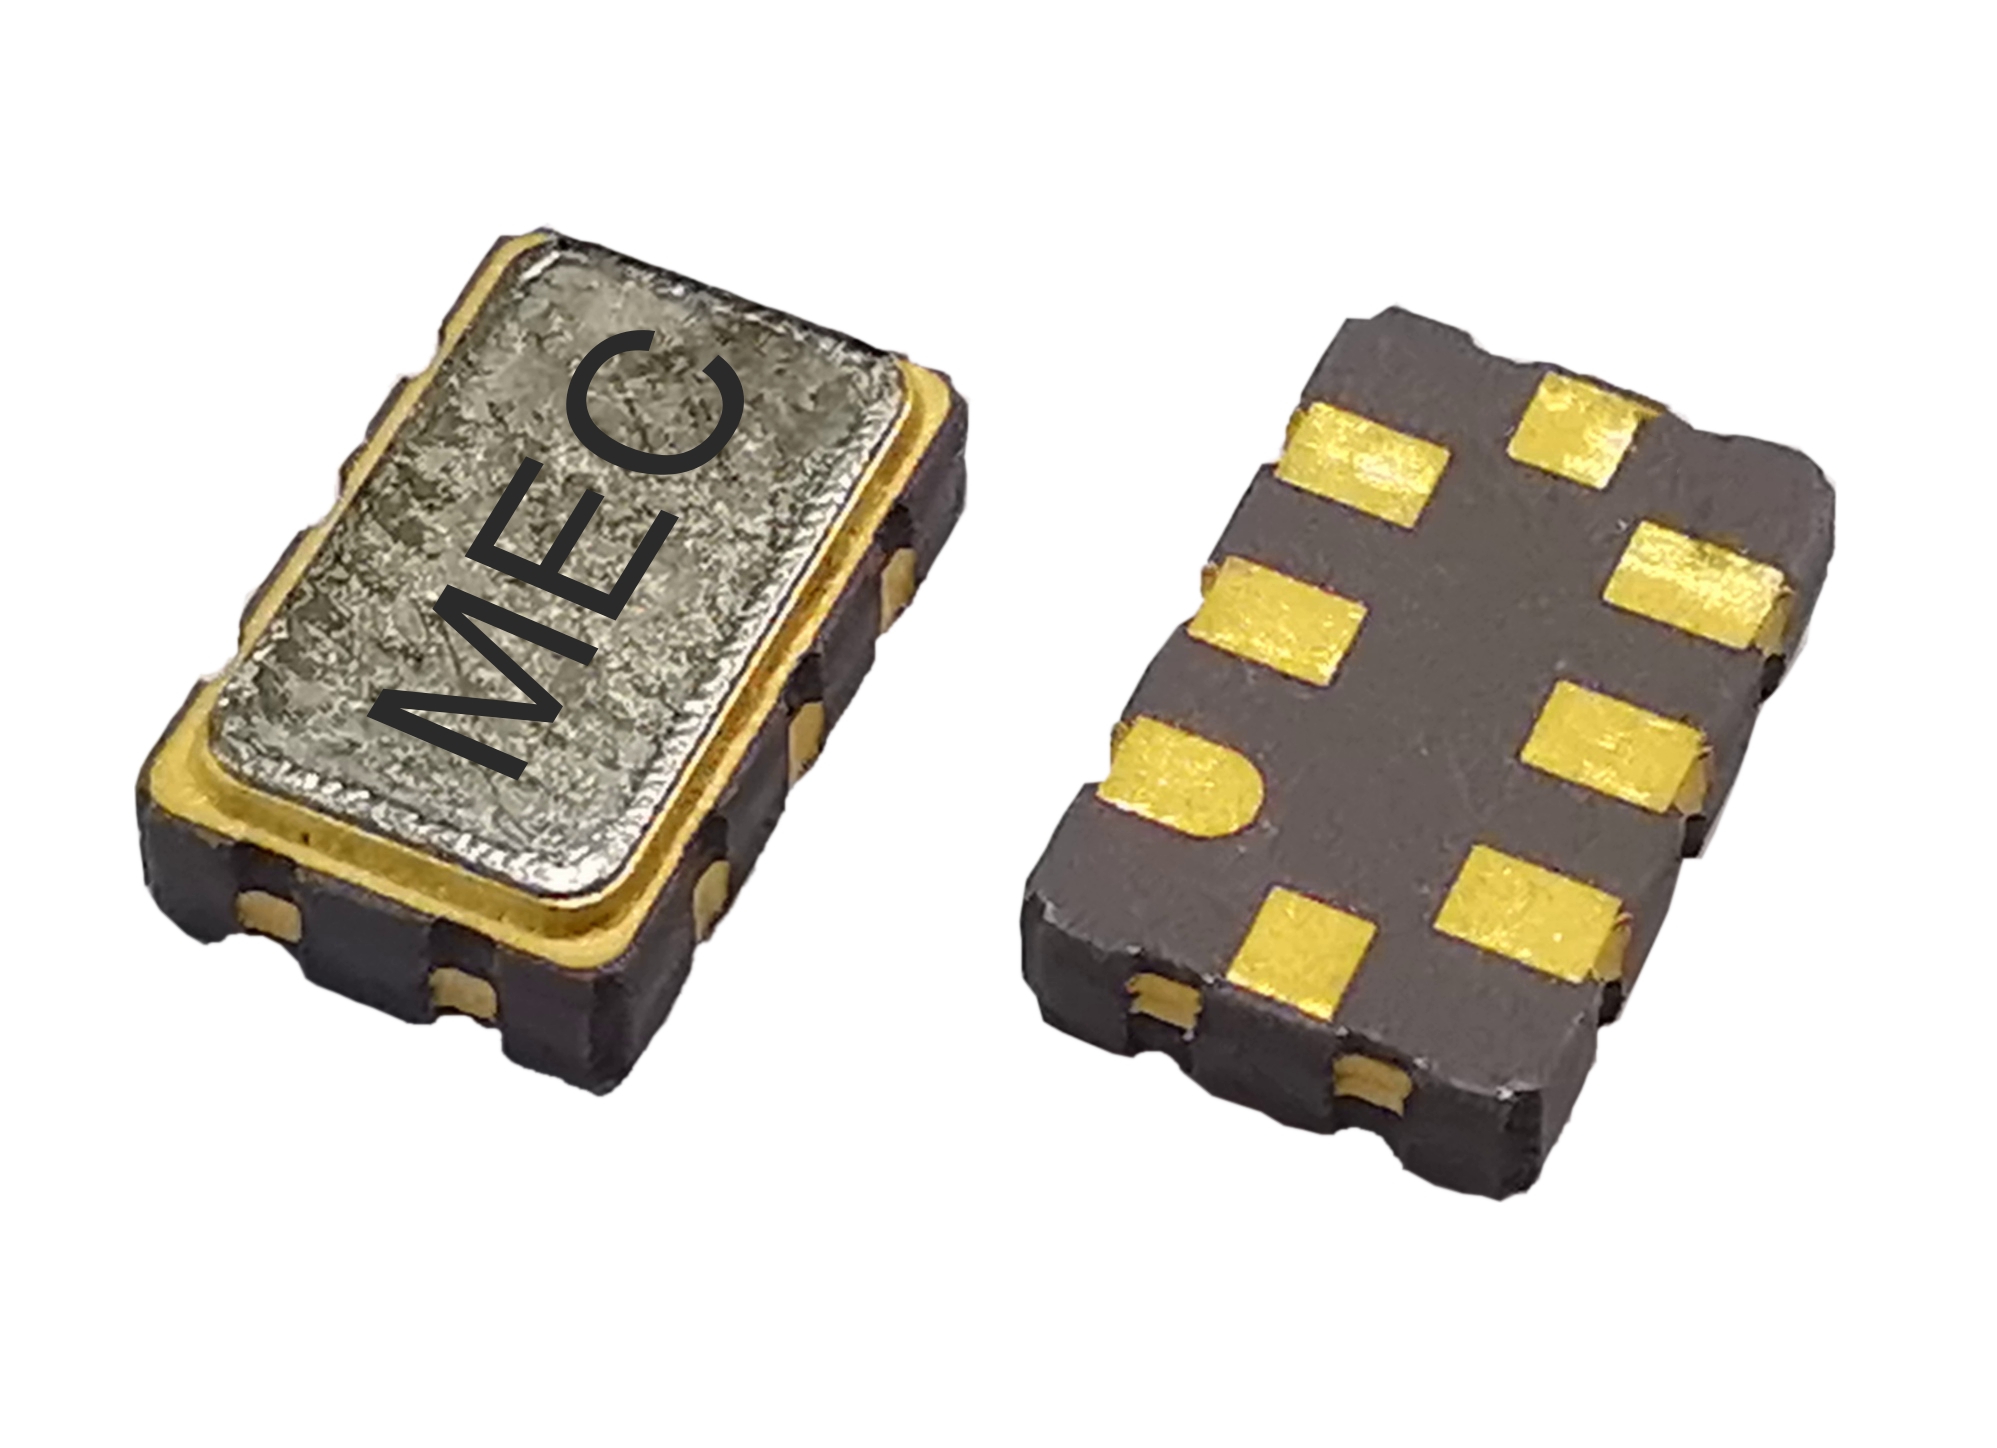 GCJF538 5032 1.8V Ultra Low Jitter Quick-turn Programmable Differential HCSL SMD Voltage Controlled Crystal Oscillator